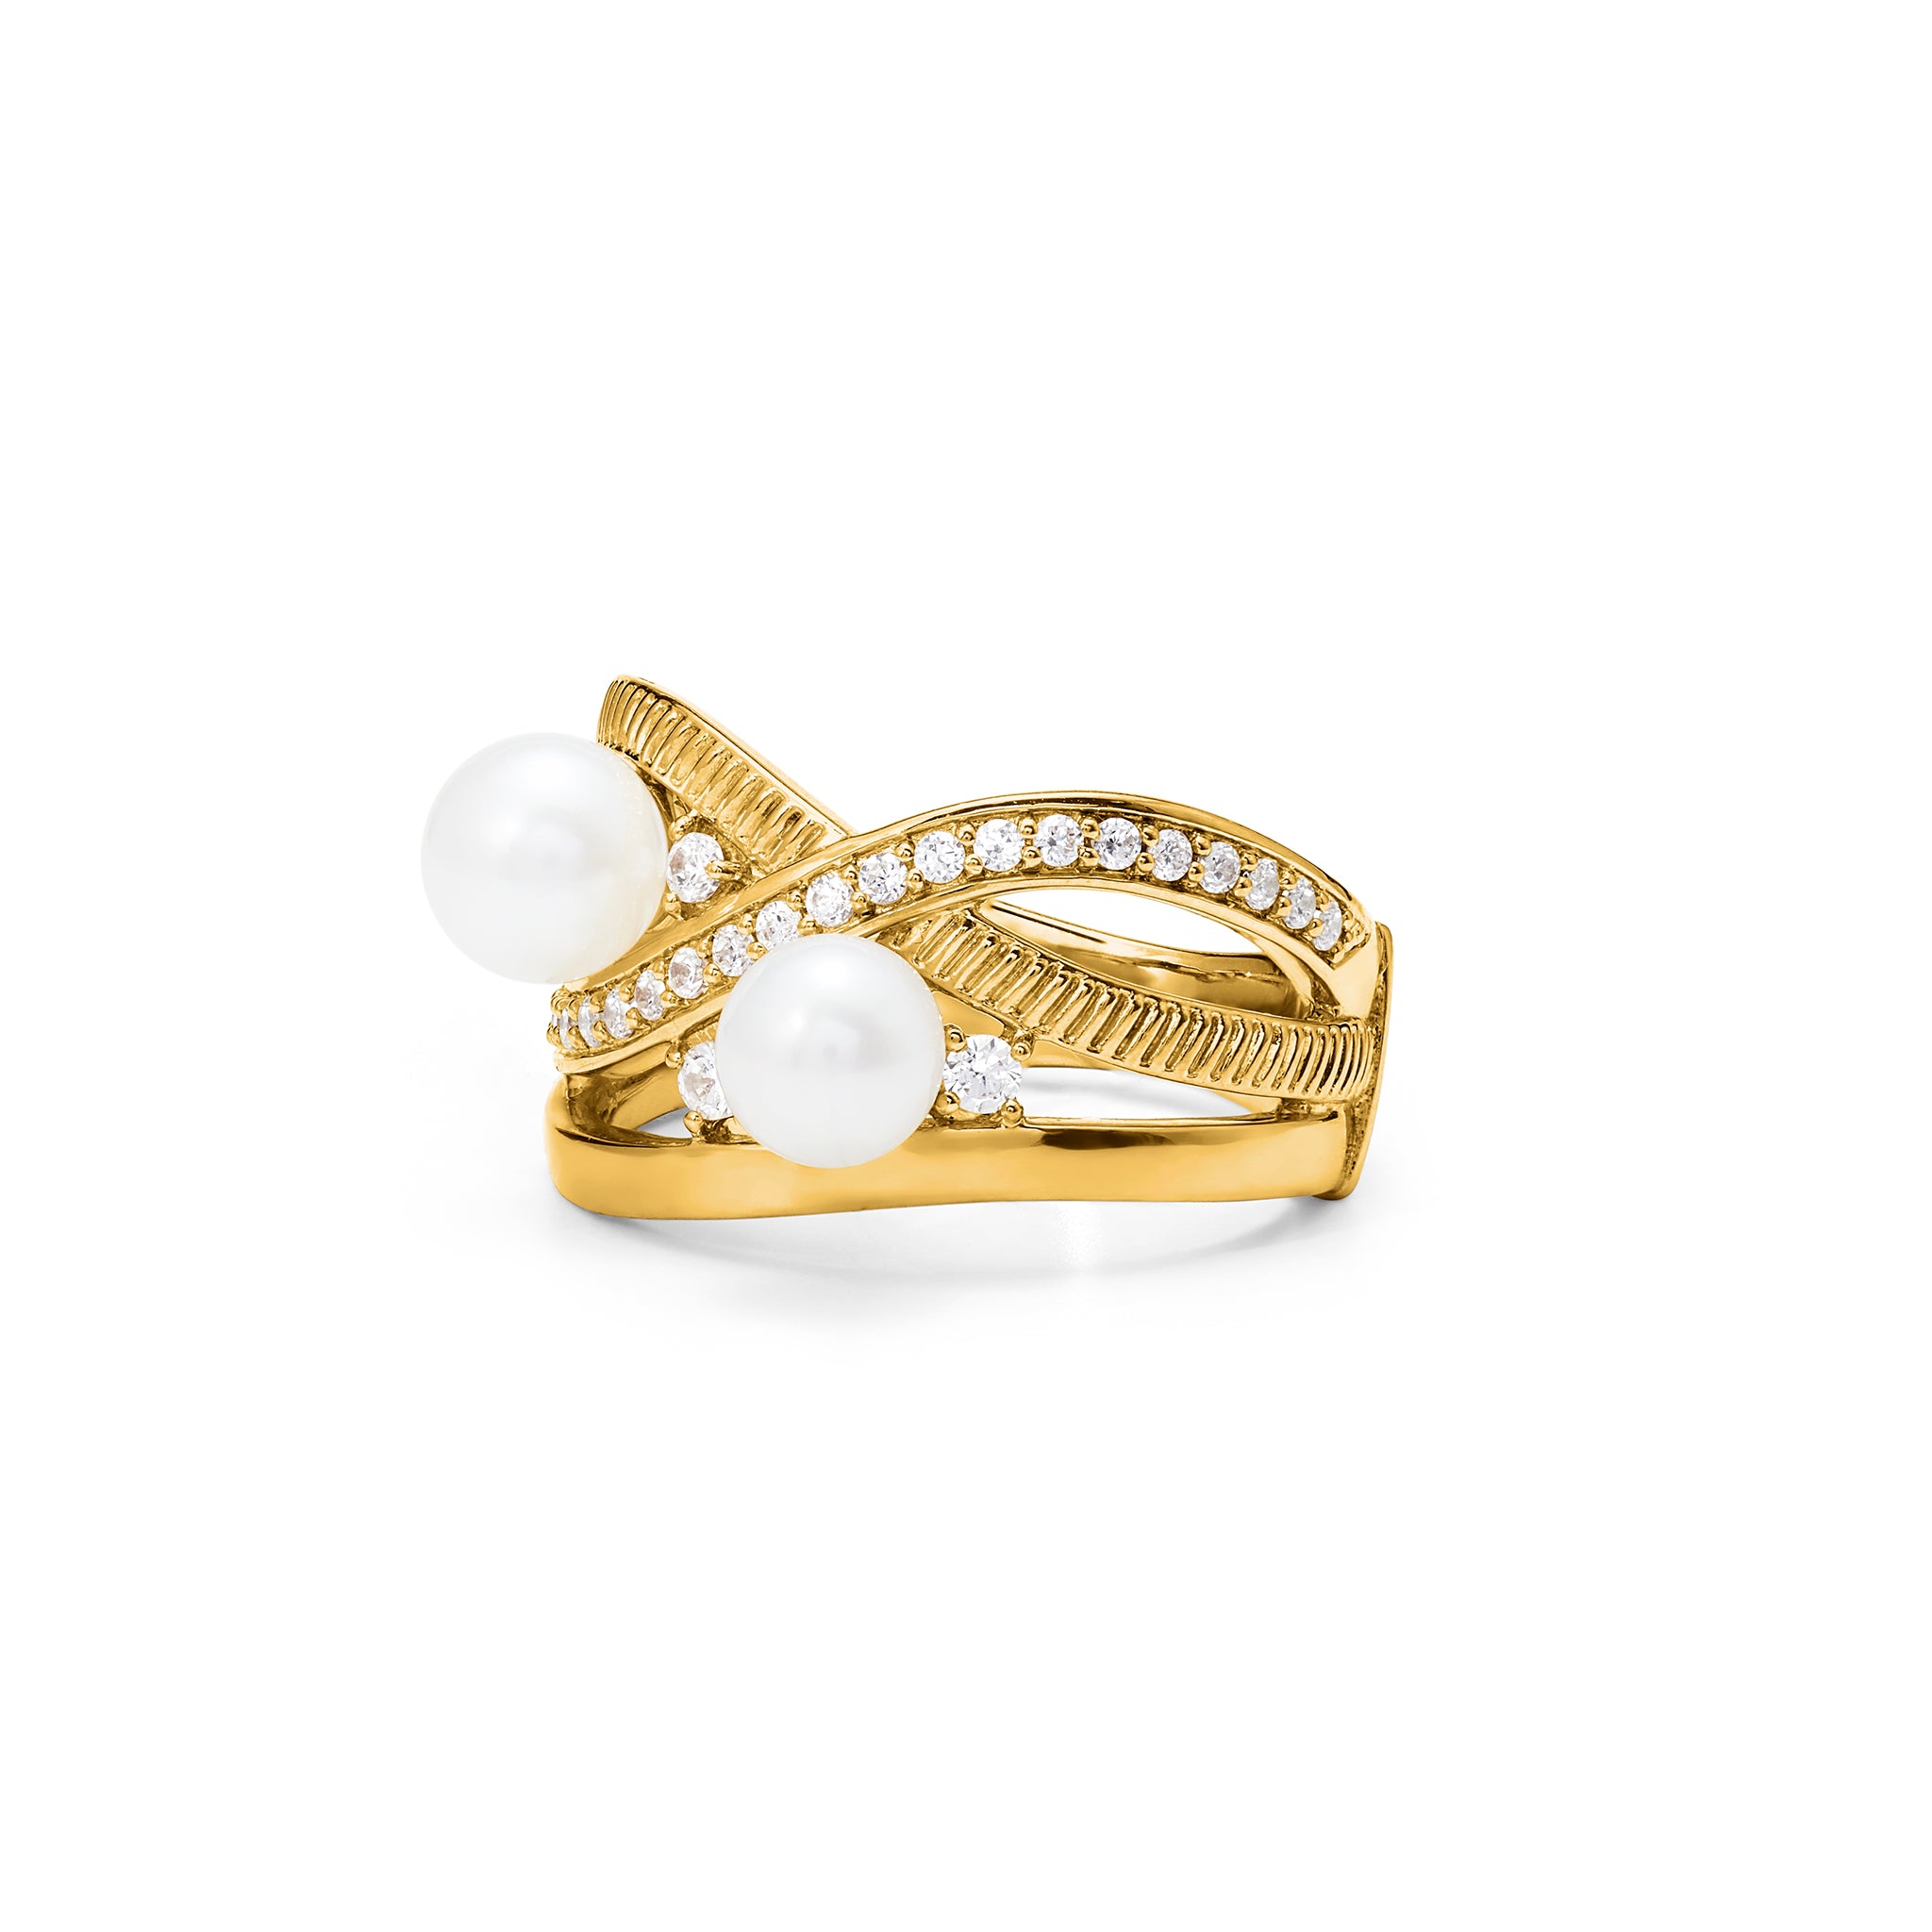 Shima Band Ring with Freshwater Pearls and Diamonds in 18K